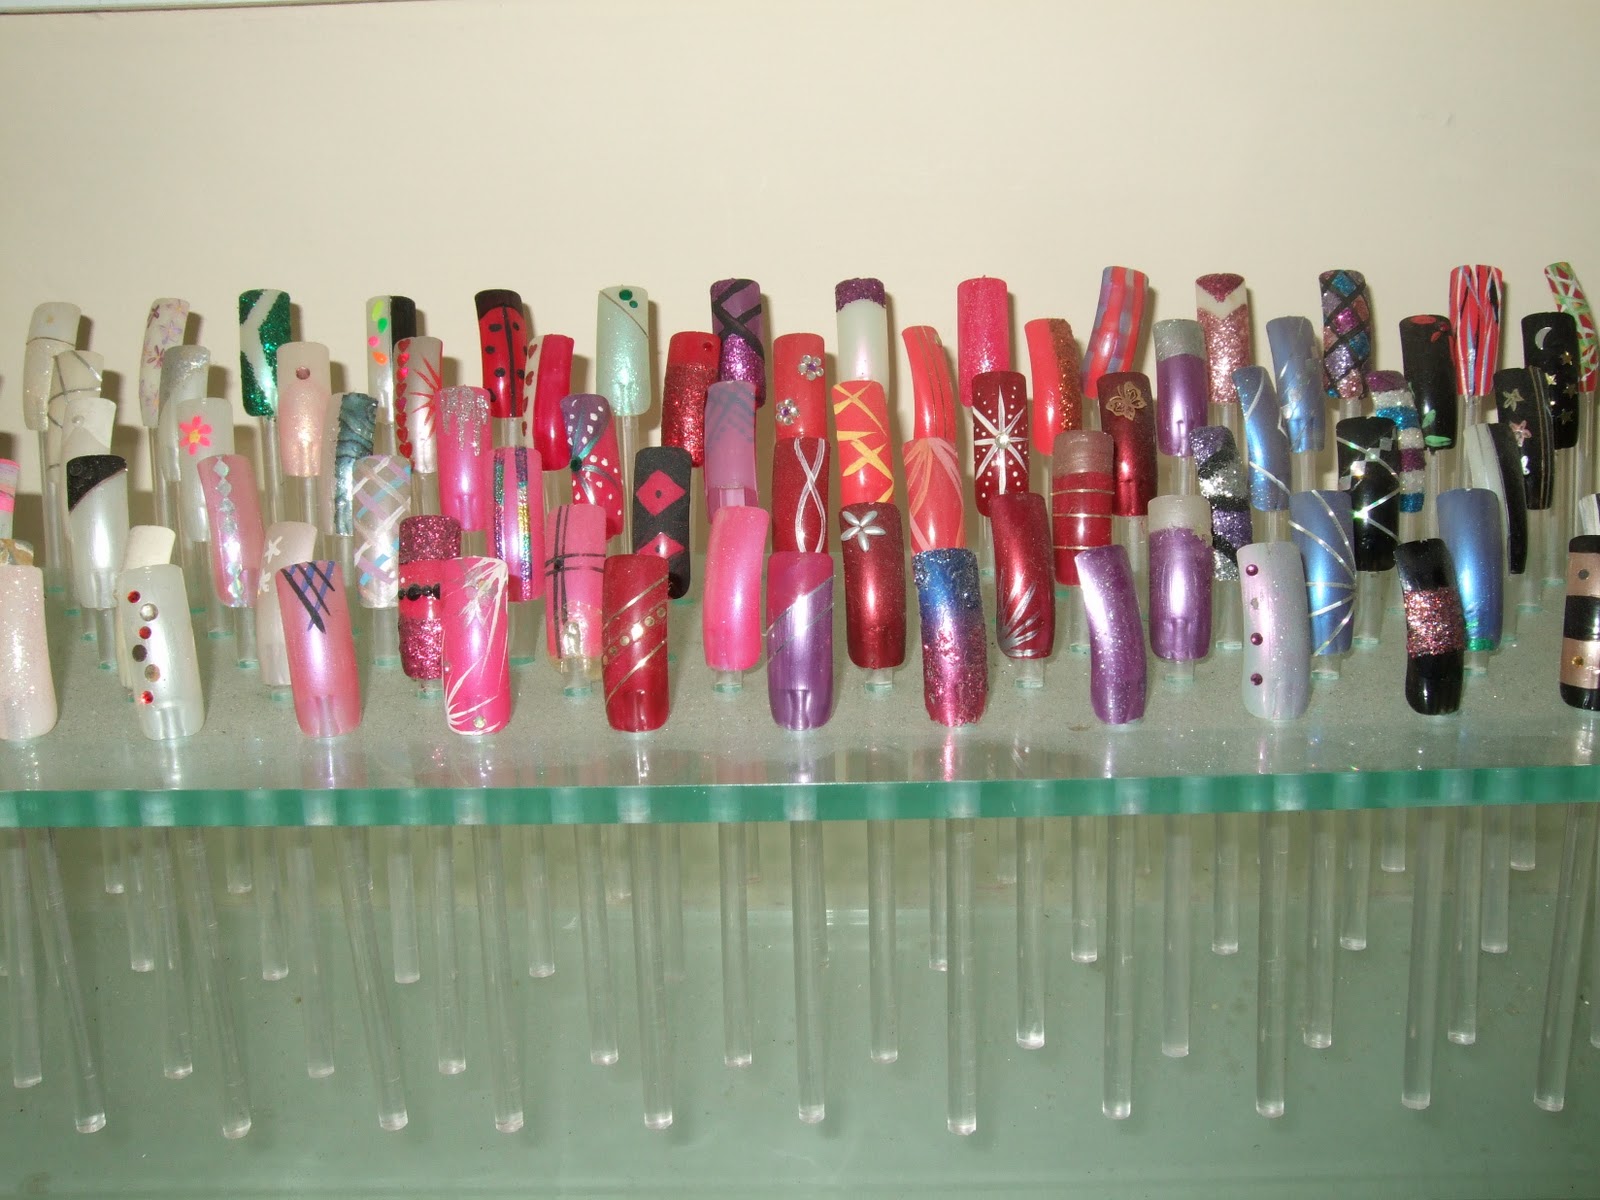 7. Creative Nail Art Display for Salons - wide 3